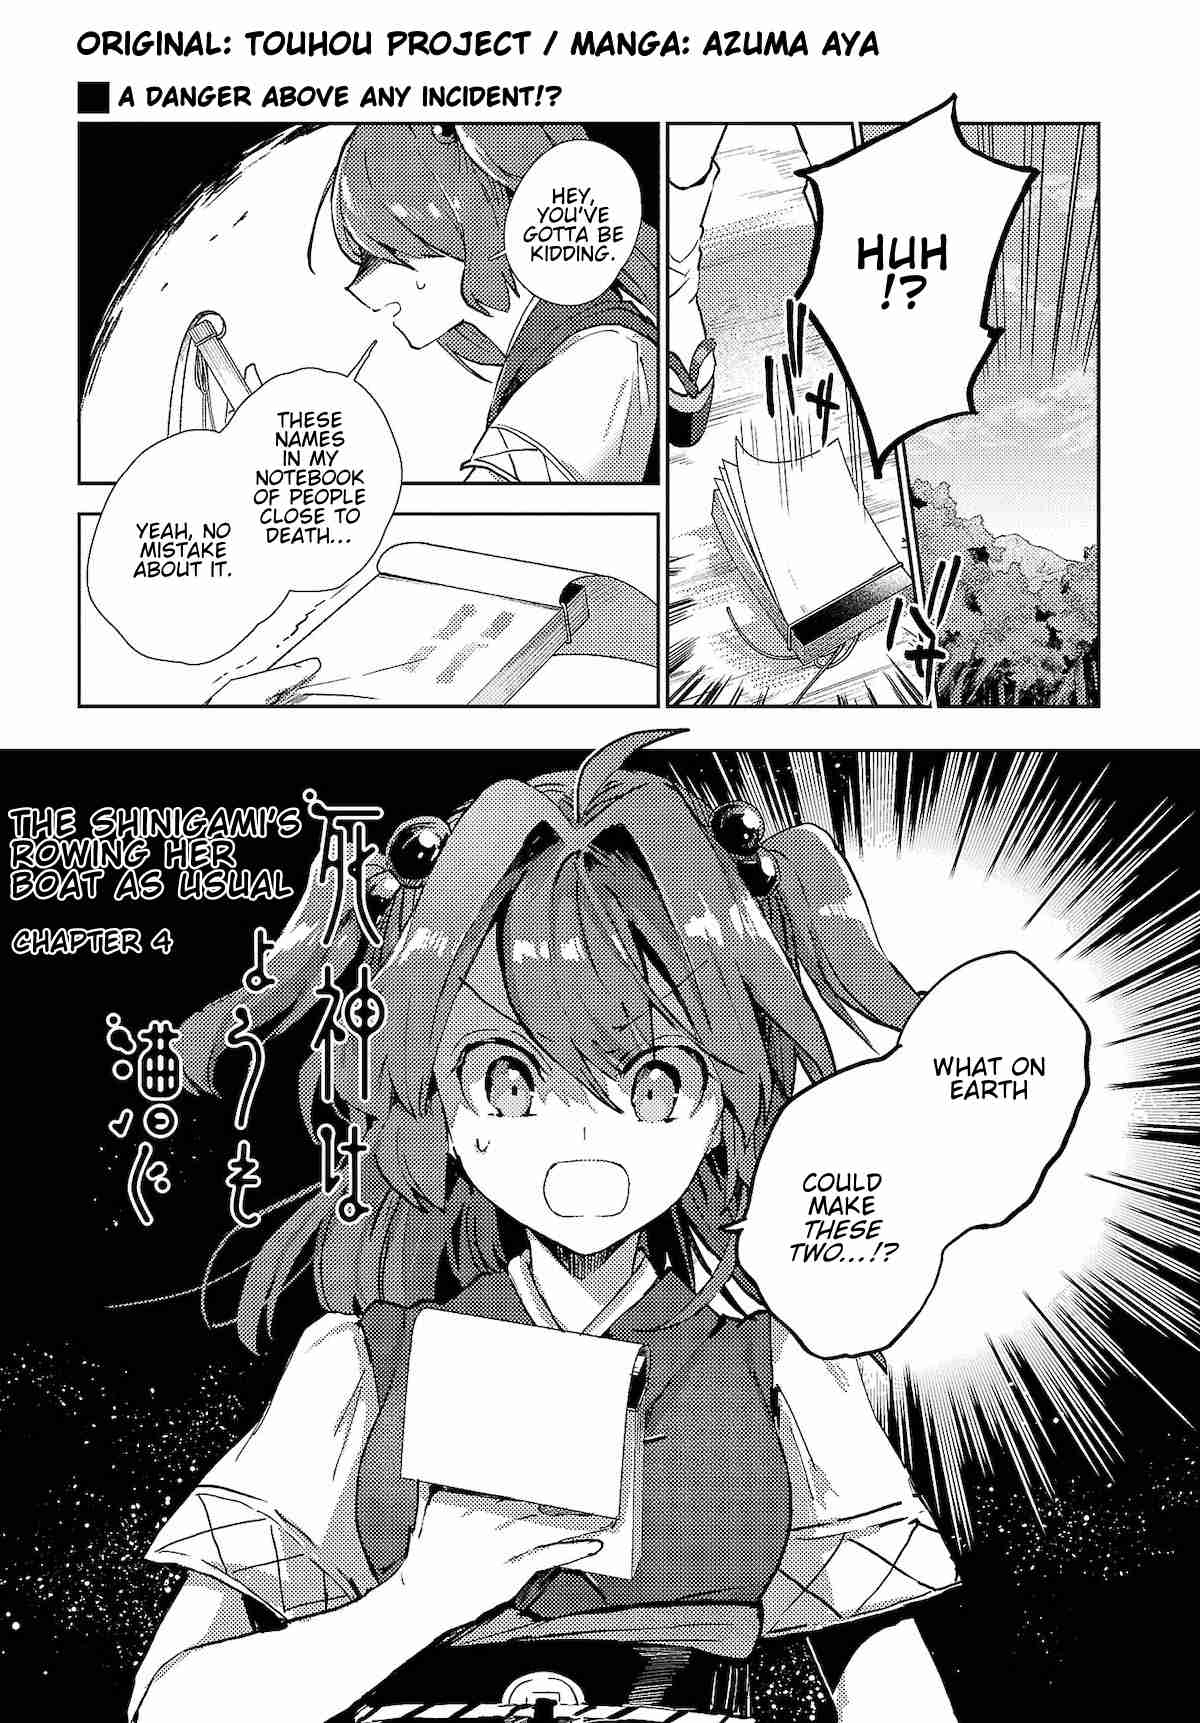 Touhou ~ The Shinigami's Rowing Her Boat as Usual Ch. 4